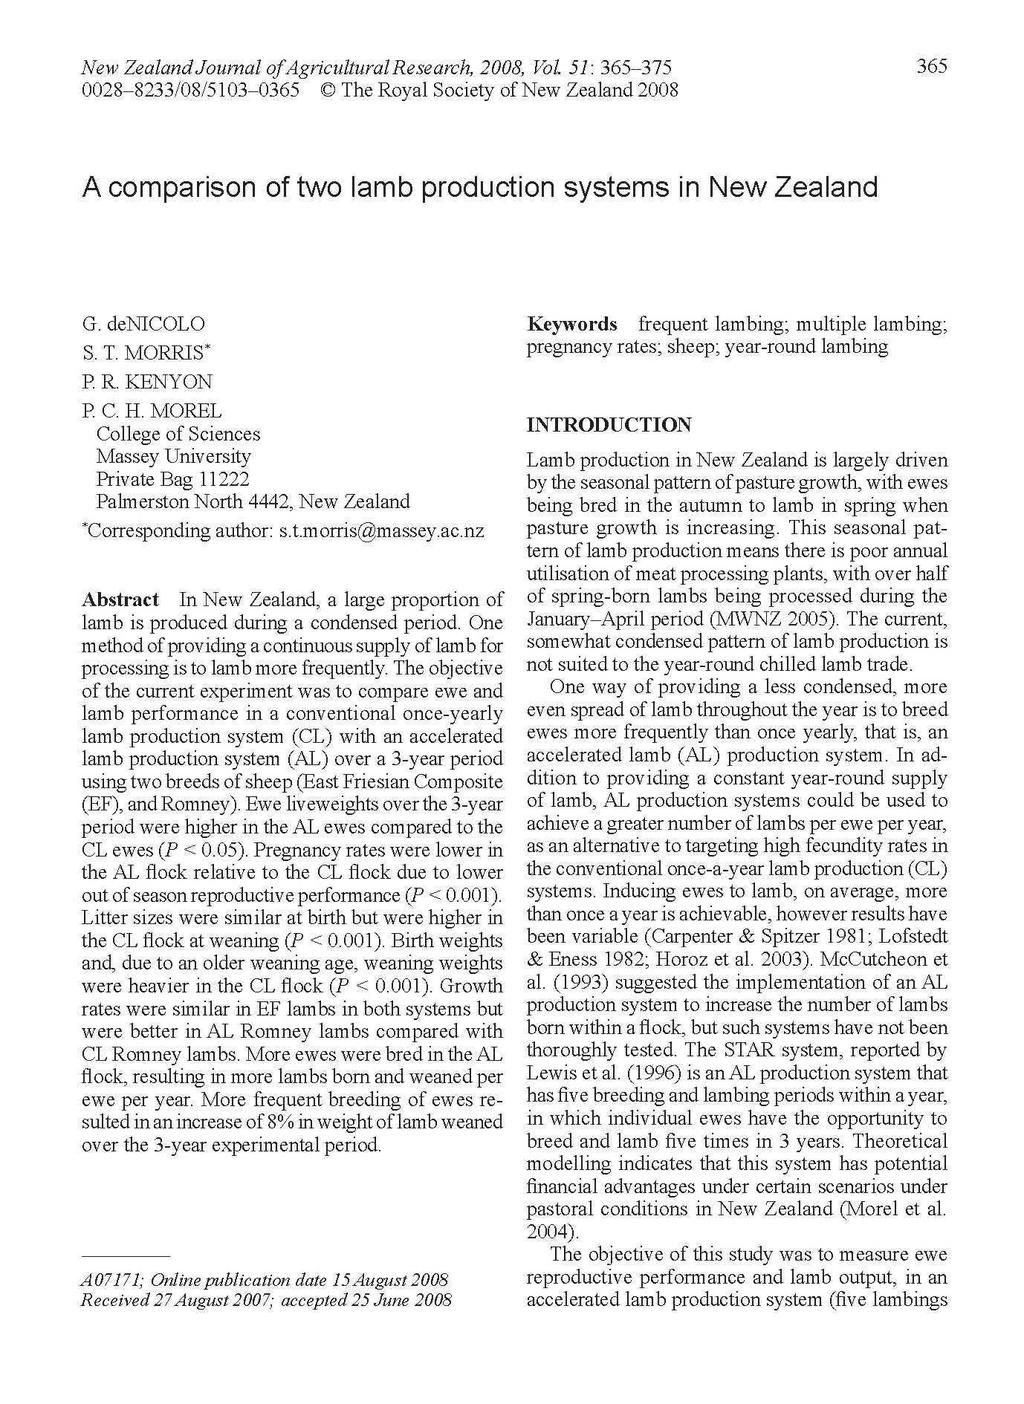 New Zealand Journal of Agricultural Research, 2008, Vol 51: 365-375 0028-8233/08/5103-0365 The Royal Society of New Zealand 2008 365 A comparison of two lamb production systems in New Zealand G.